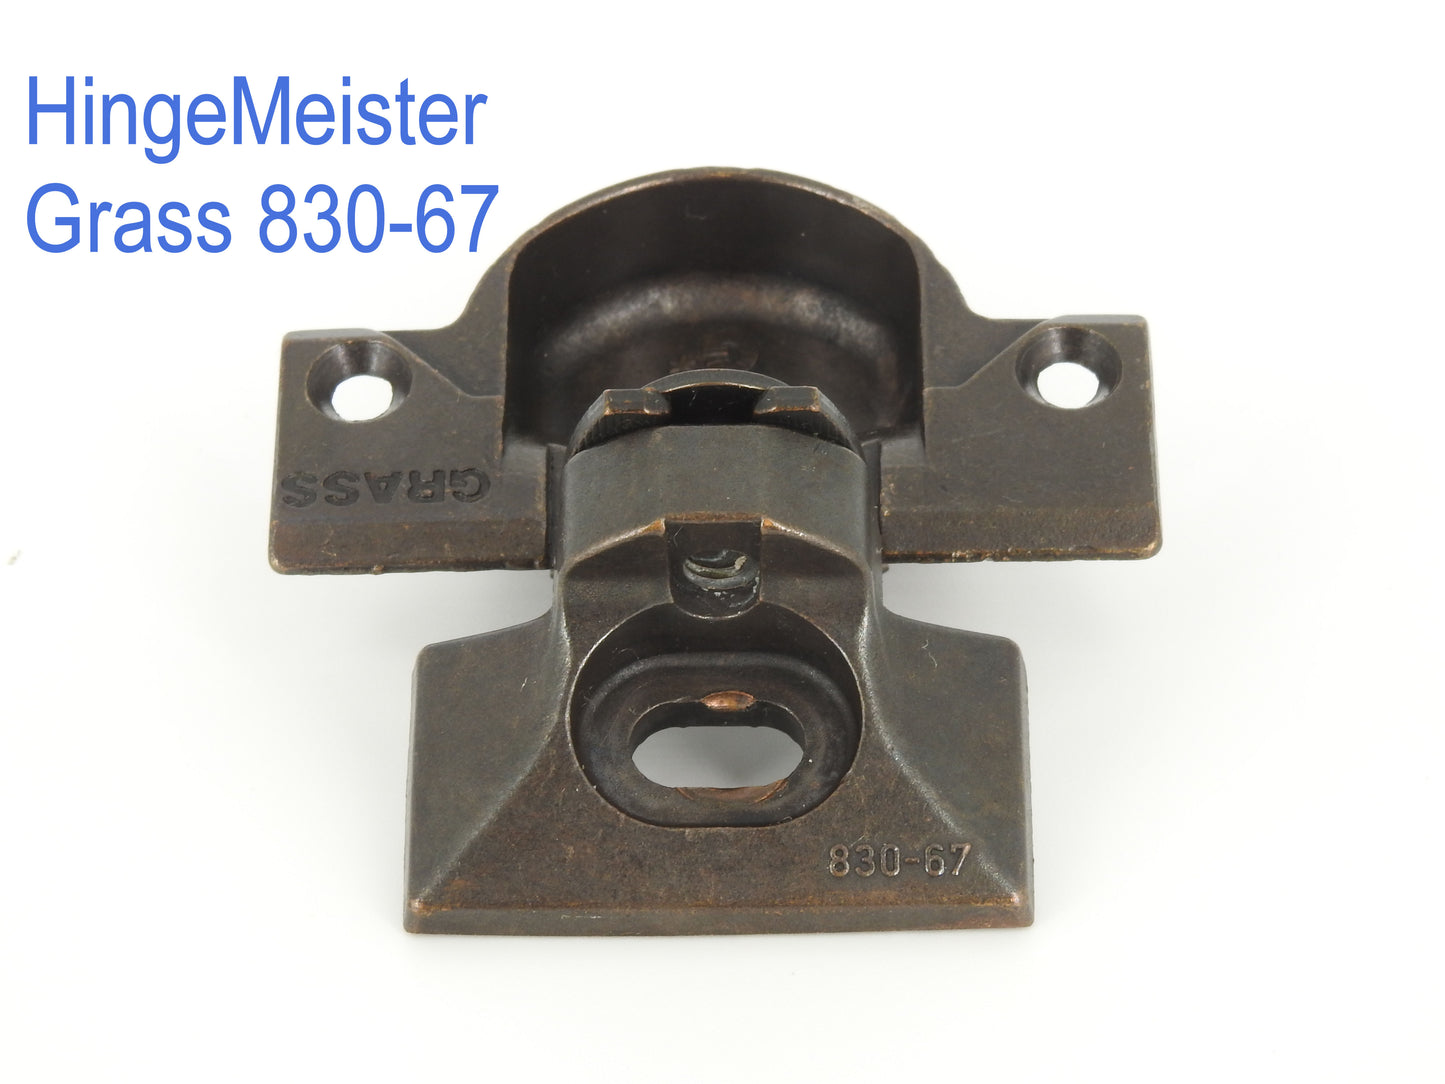 Grass 830-67 Bronze Hinge and mounting plate - Complete Hinge - Refurbished